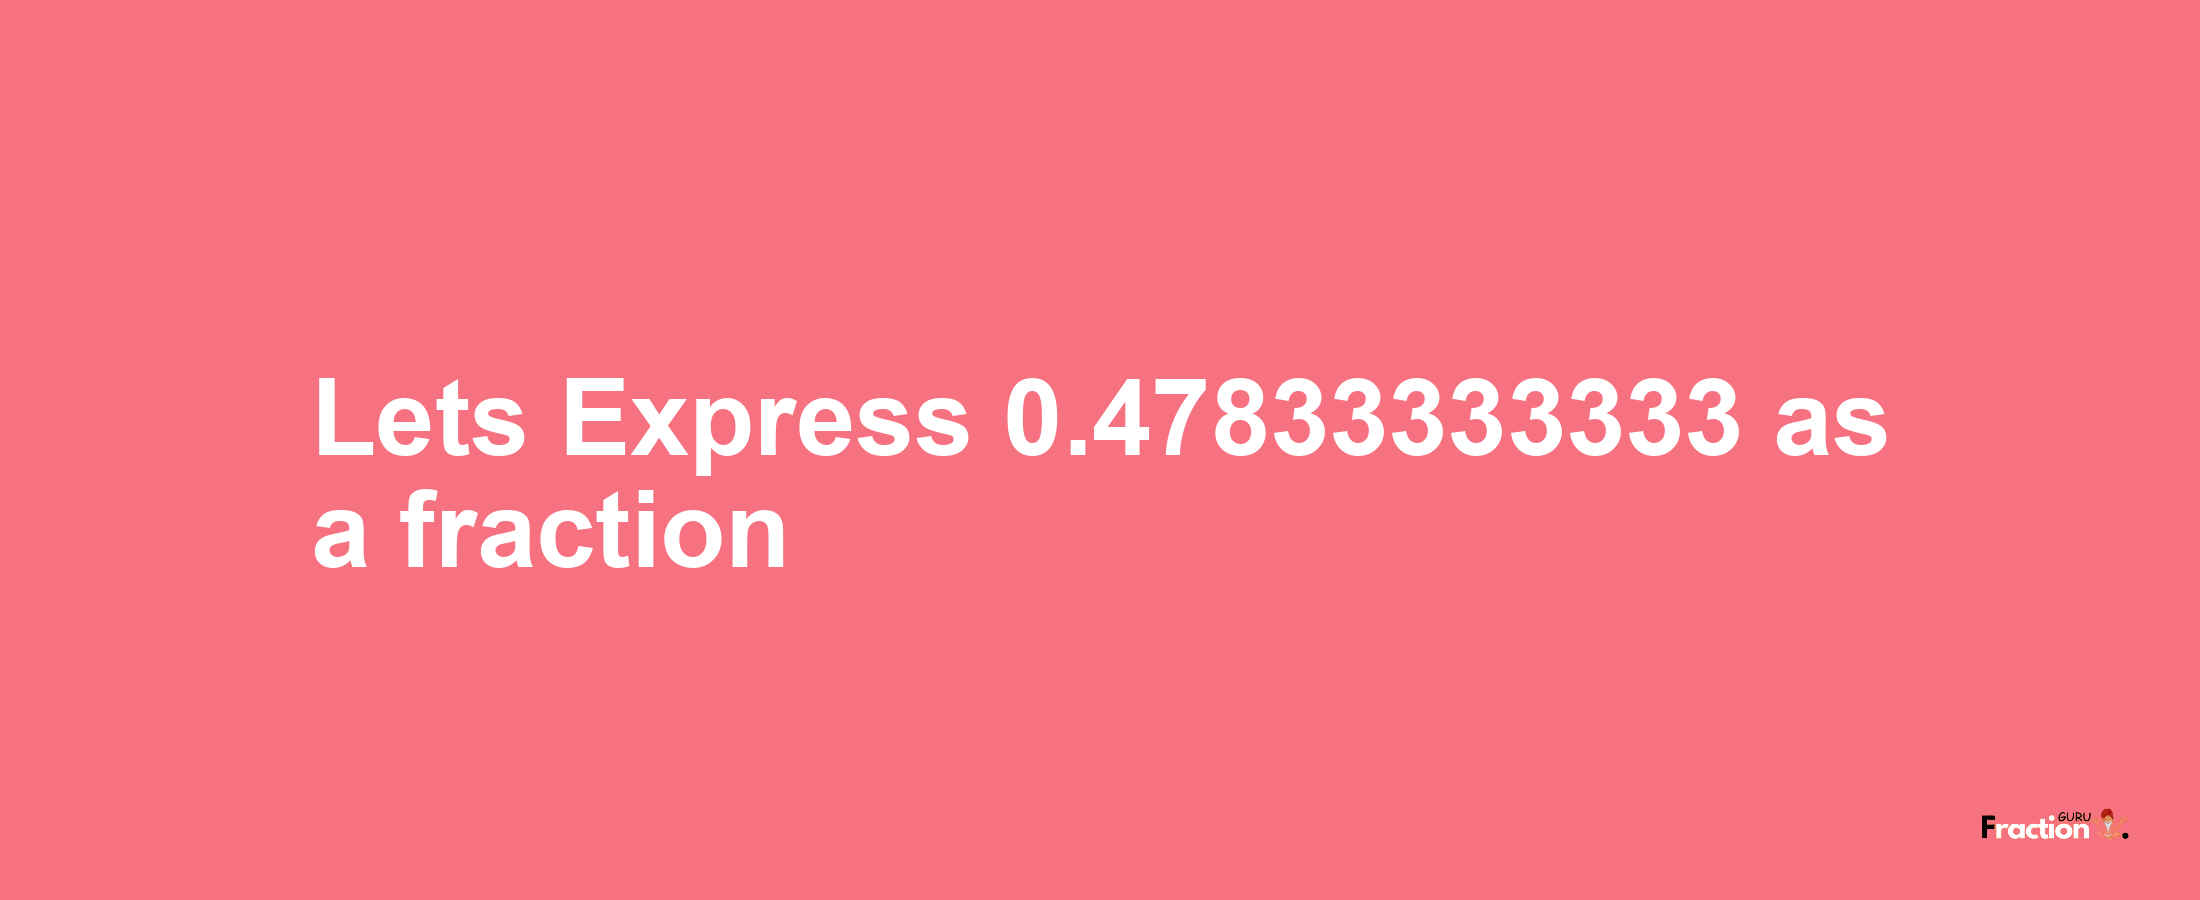 Lets Express 0.47833333333 as afraction